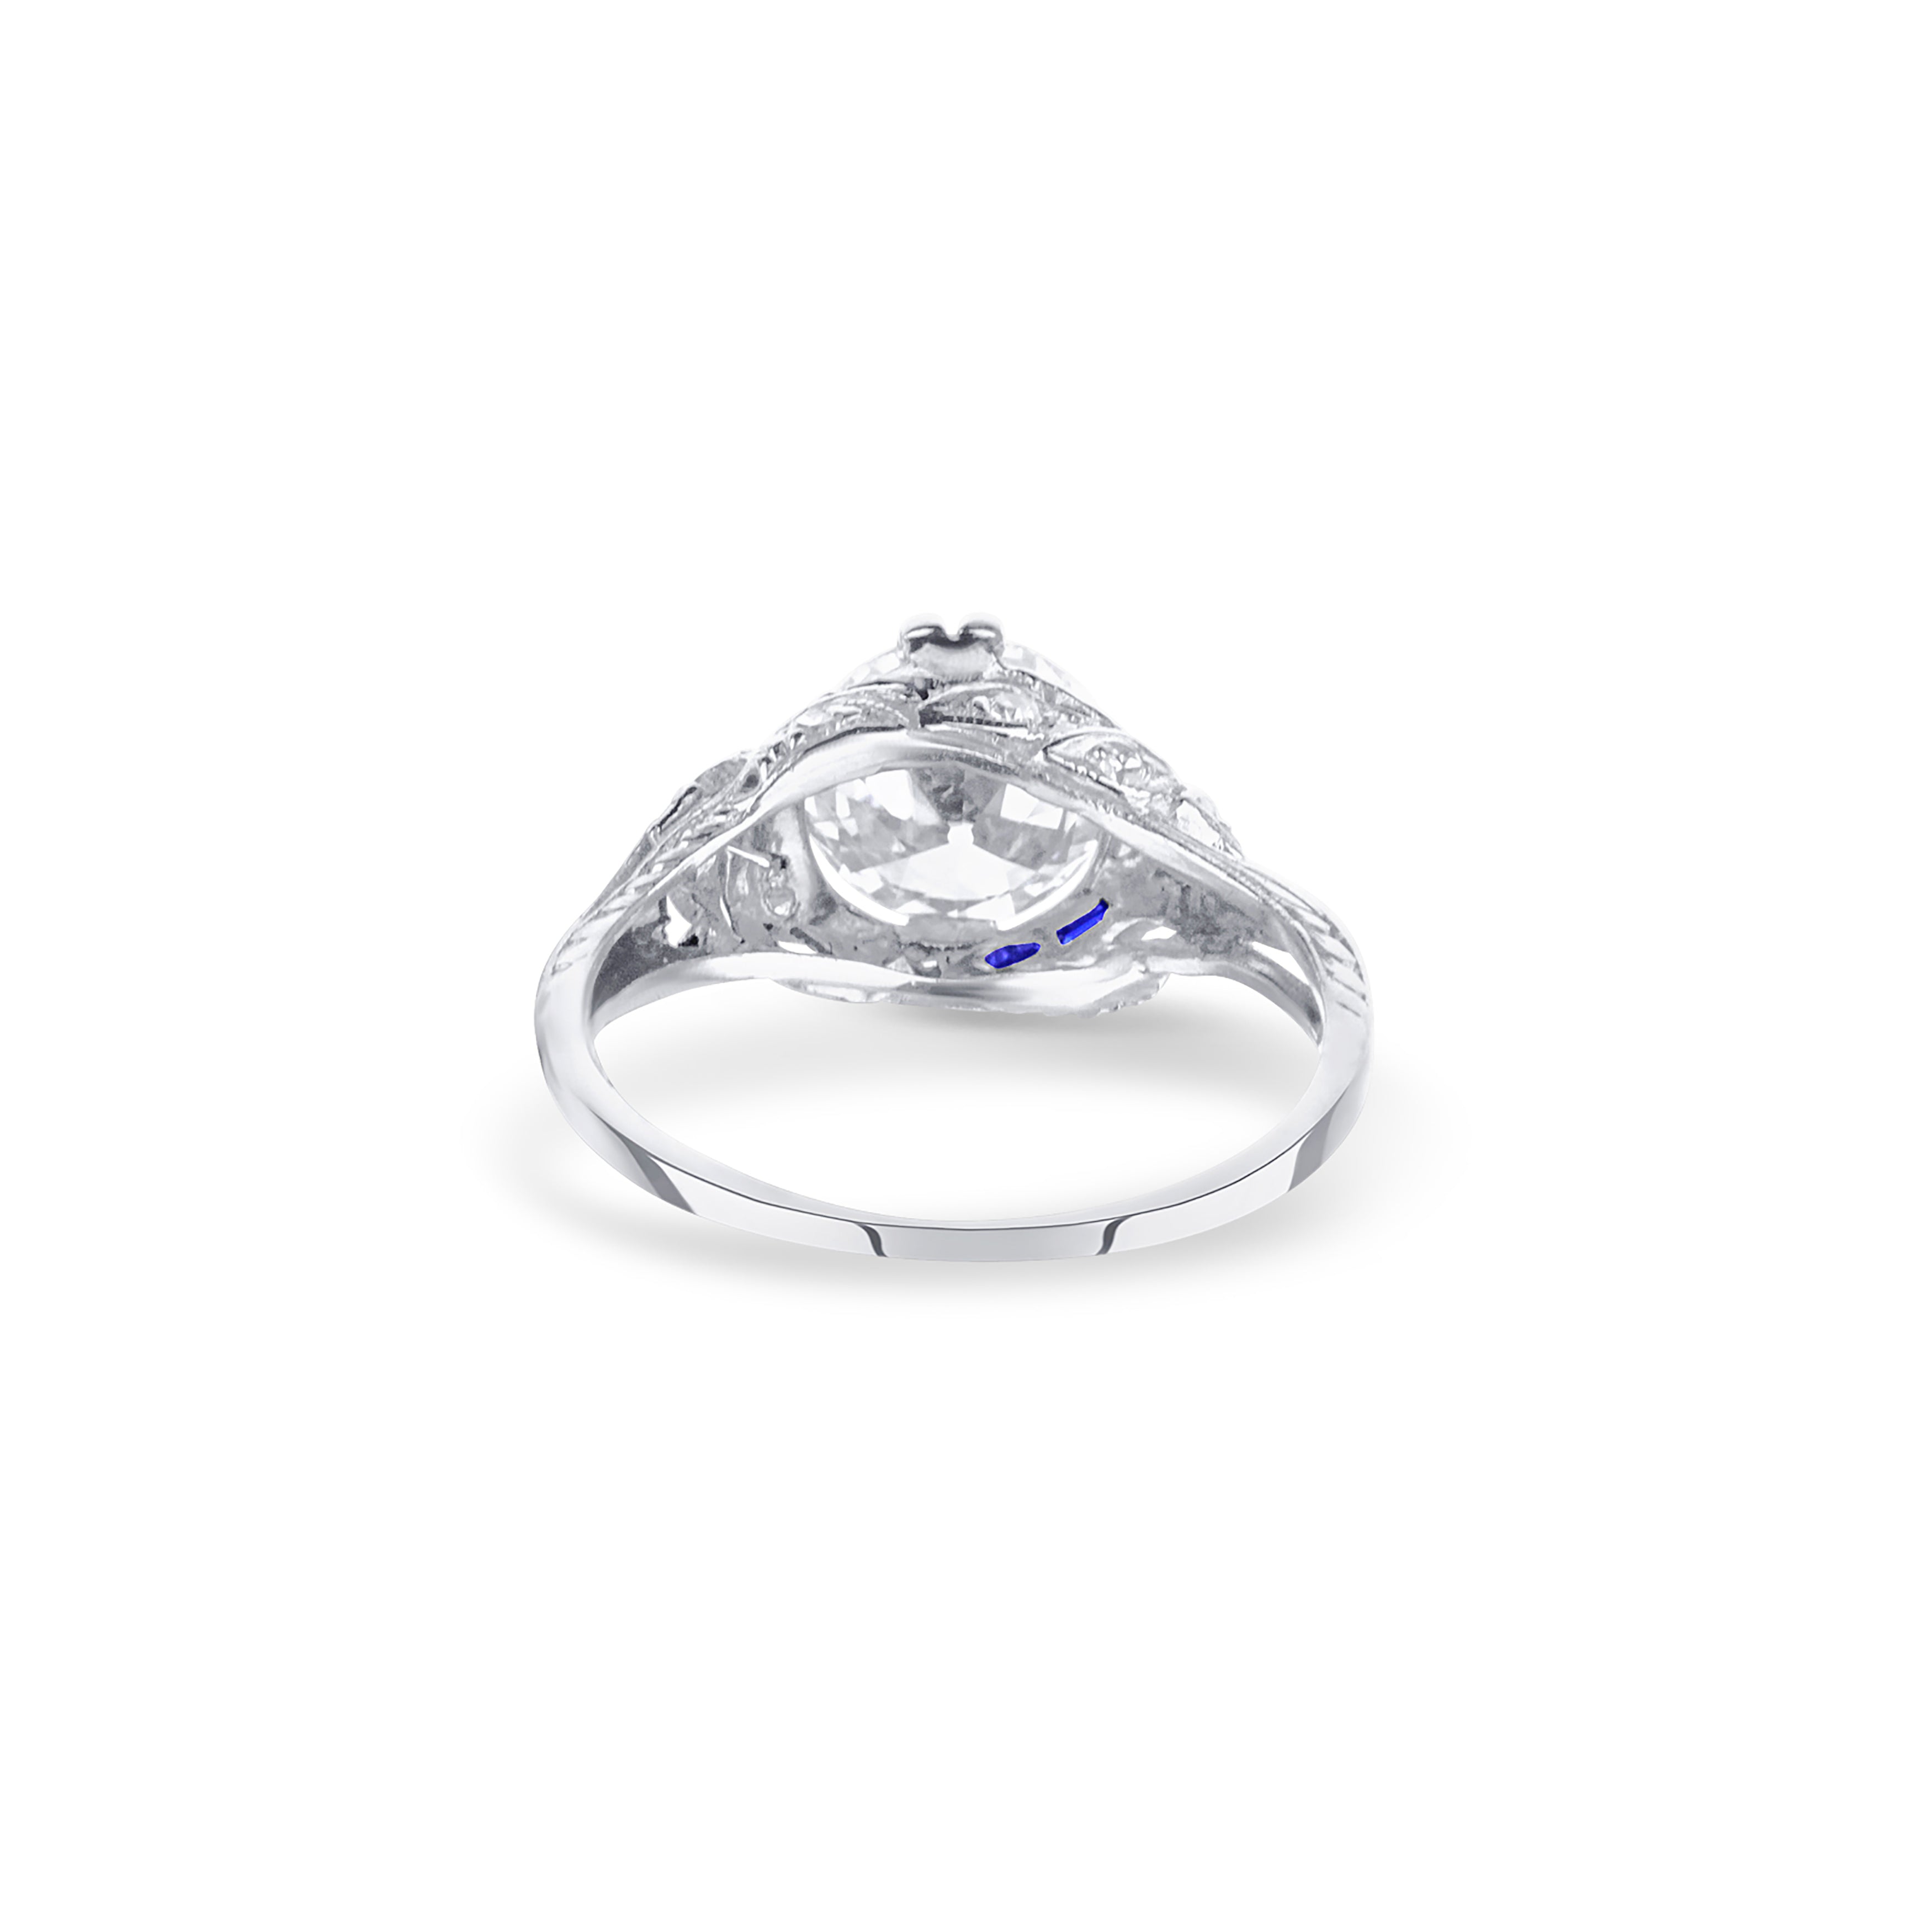 Art Deco Style Diamond Engagement Ring In Platinum With Blue Sapphire Detailing